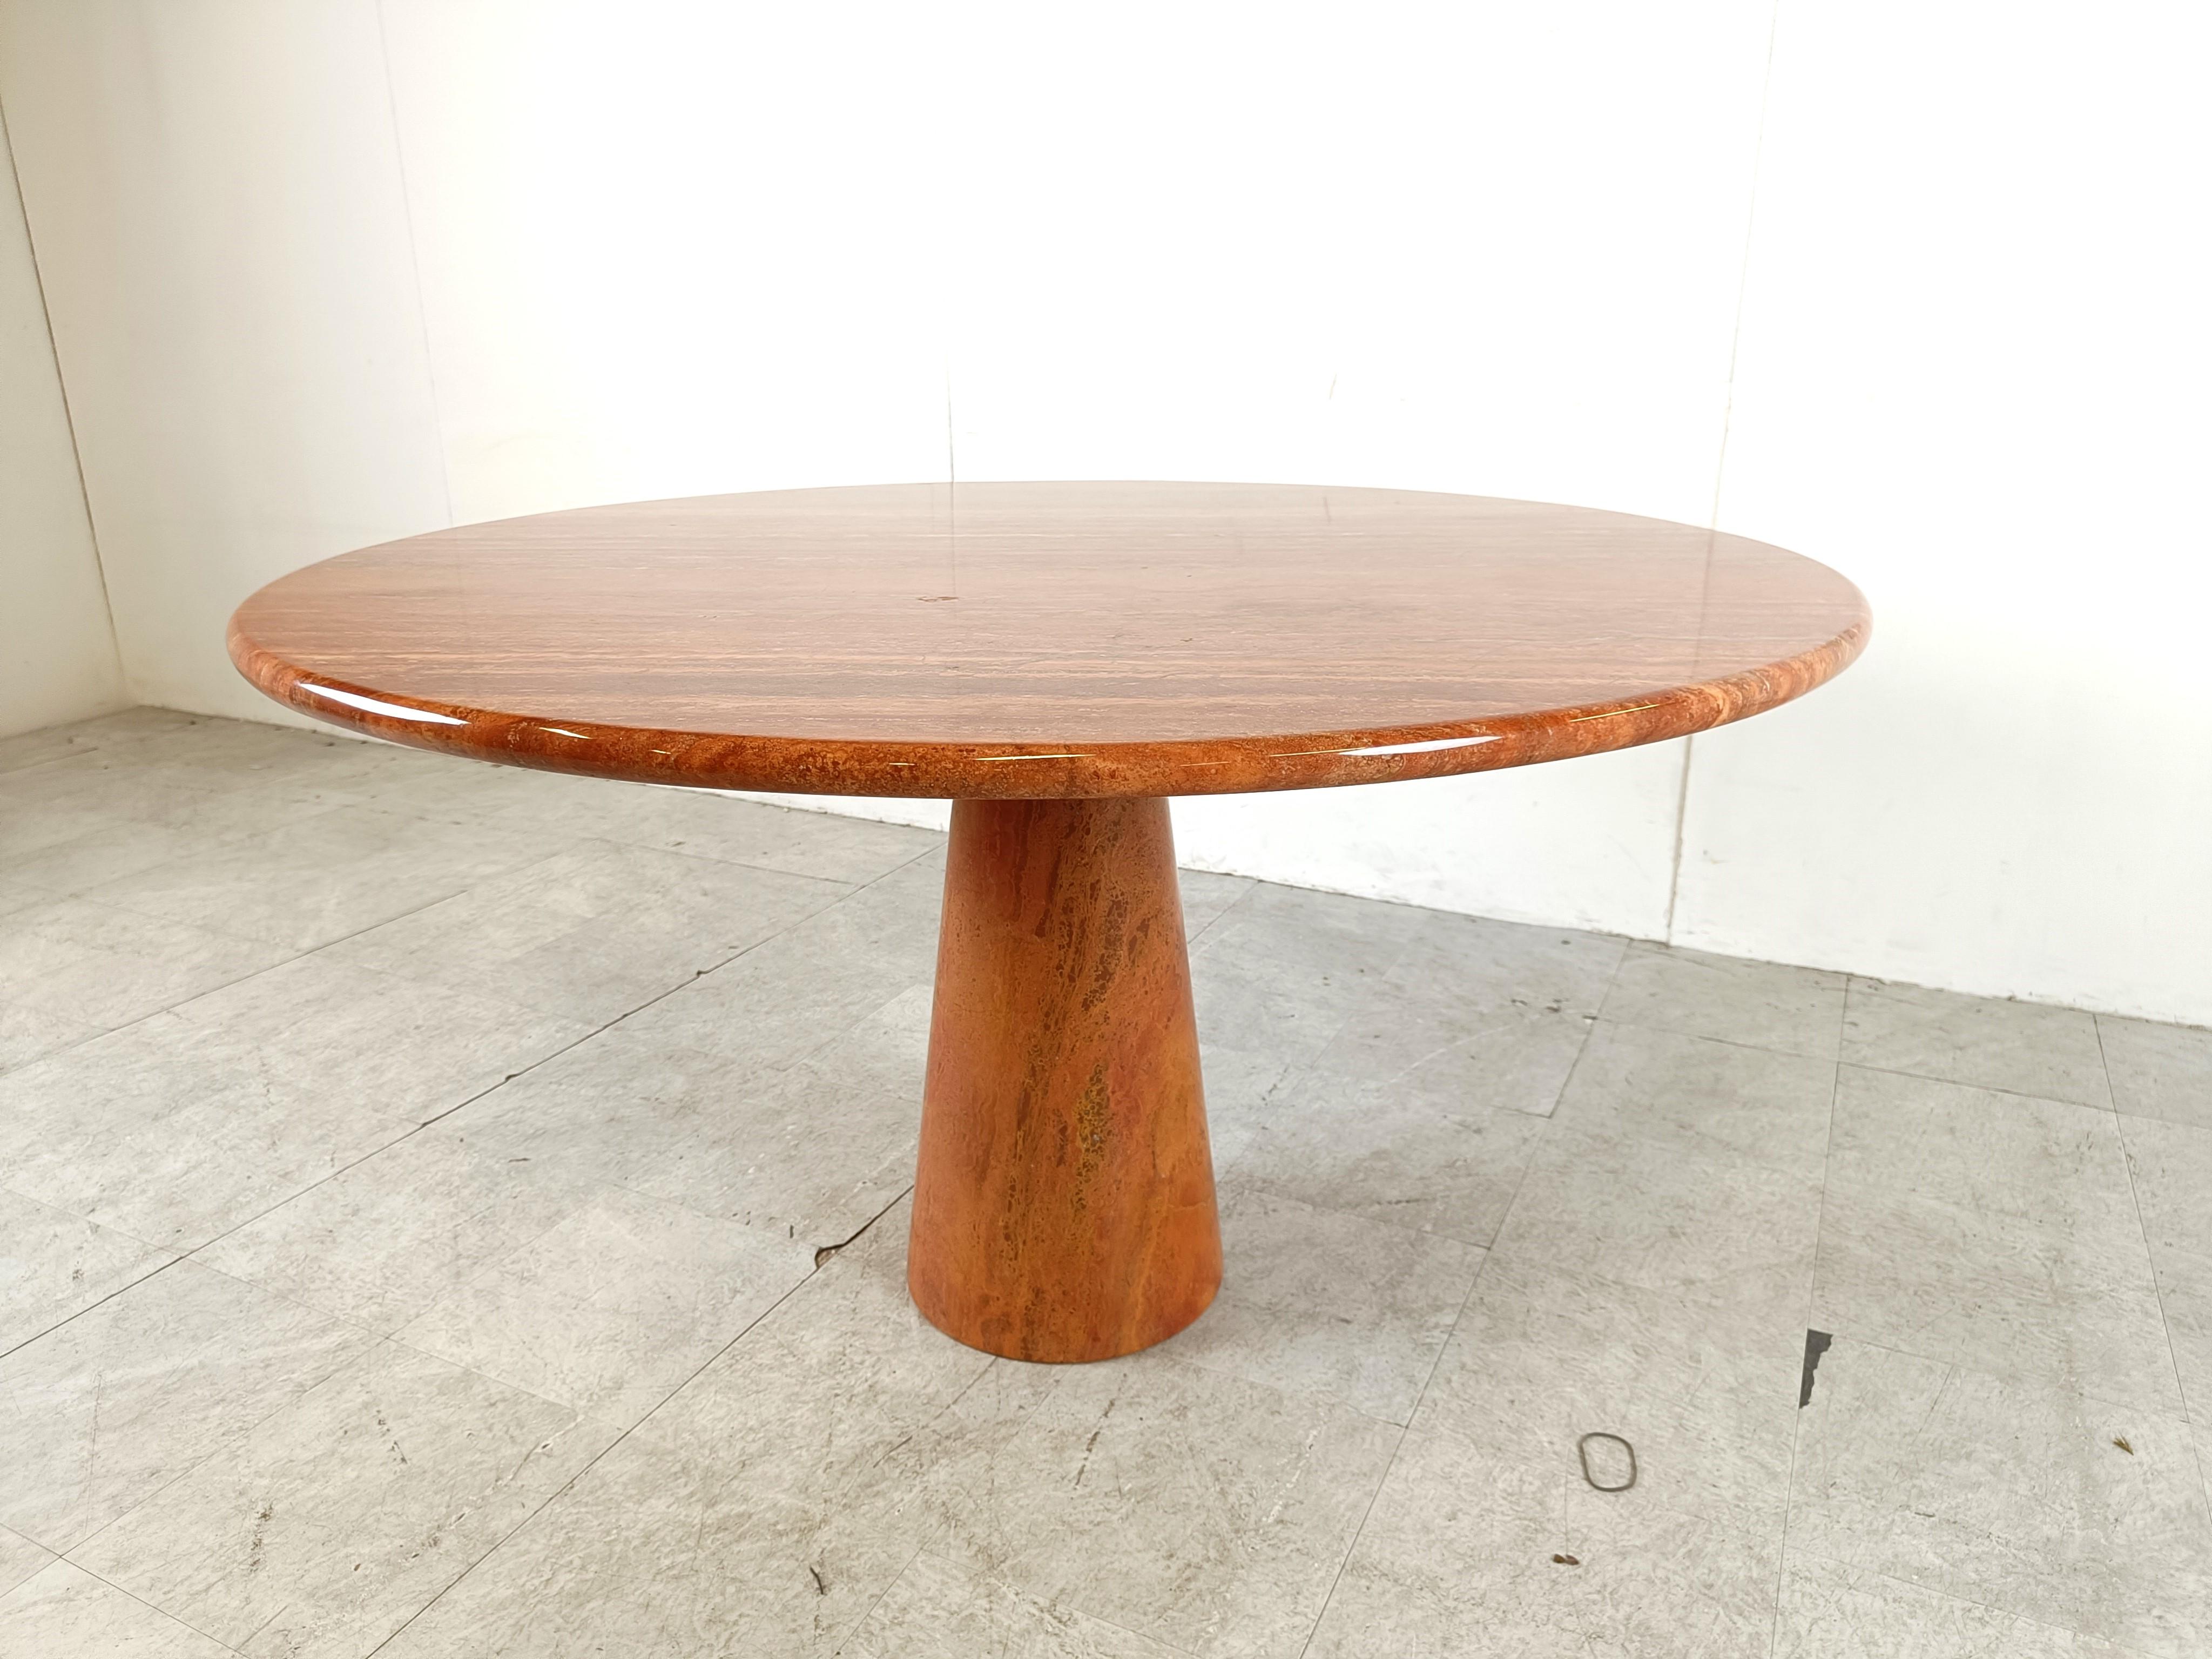 Remarkable red travertine dining table with a conical center base and a beautiful round table top.

The table was made in the 1970s, it's very much in the style of Angelo Mangiarotti

Beautiful natural red travertine stone with a gorgeous natural